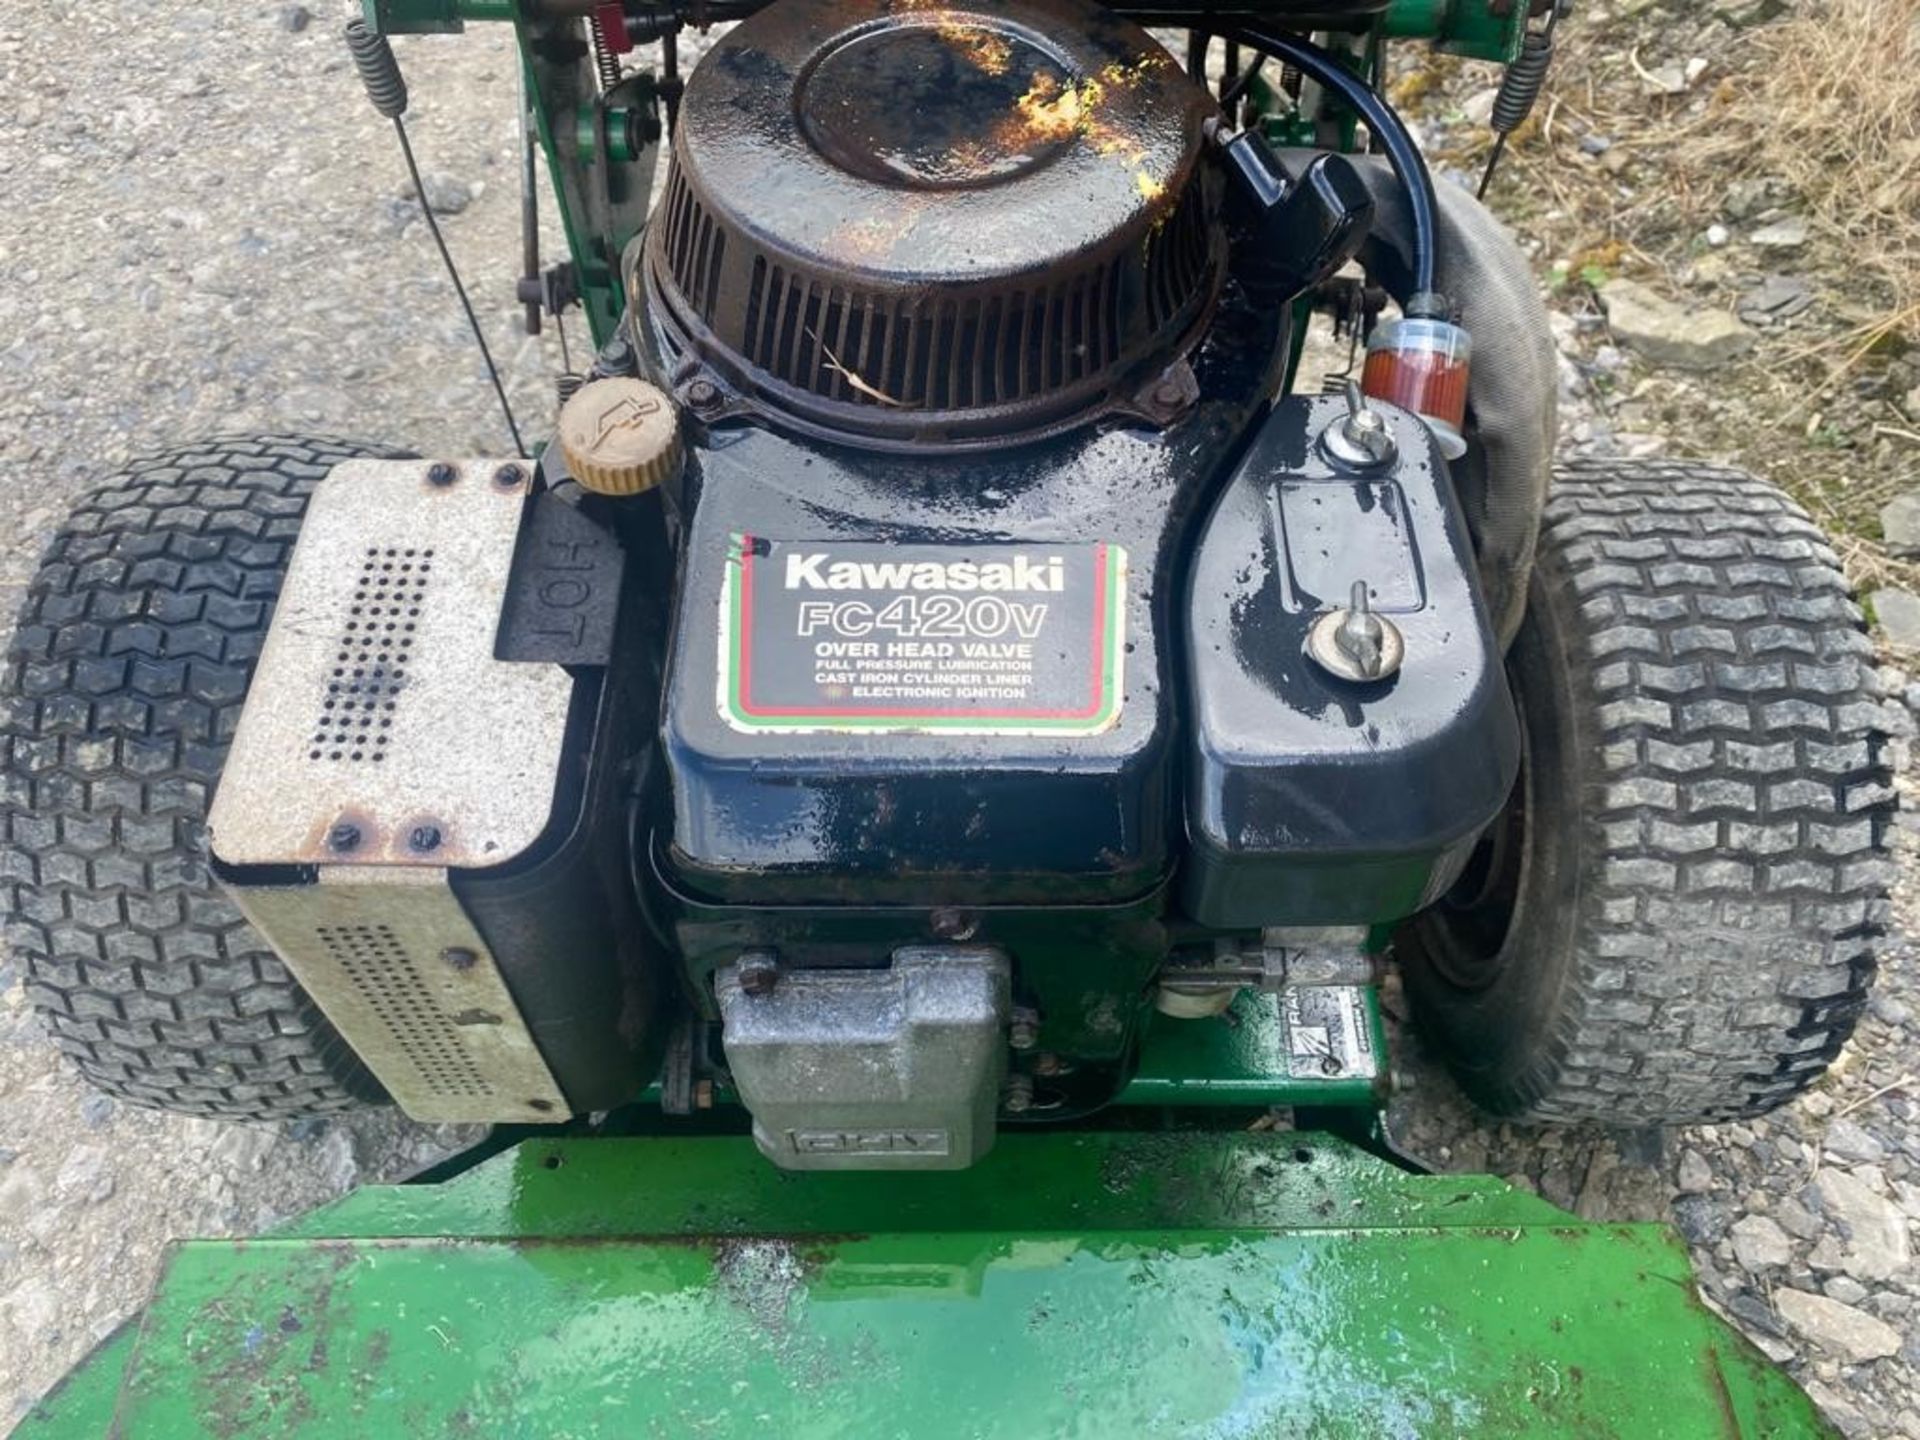 RANSOMES PEDESTRIAN MOWER - Image 7 of 9